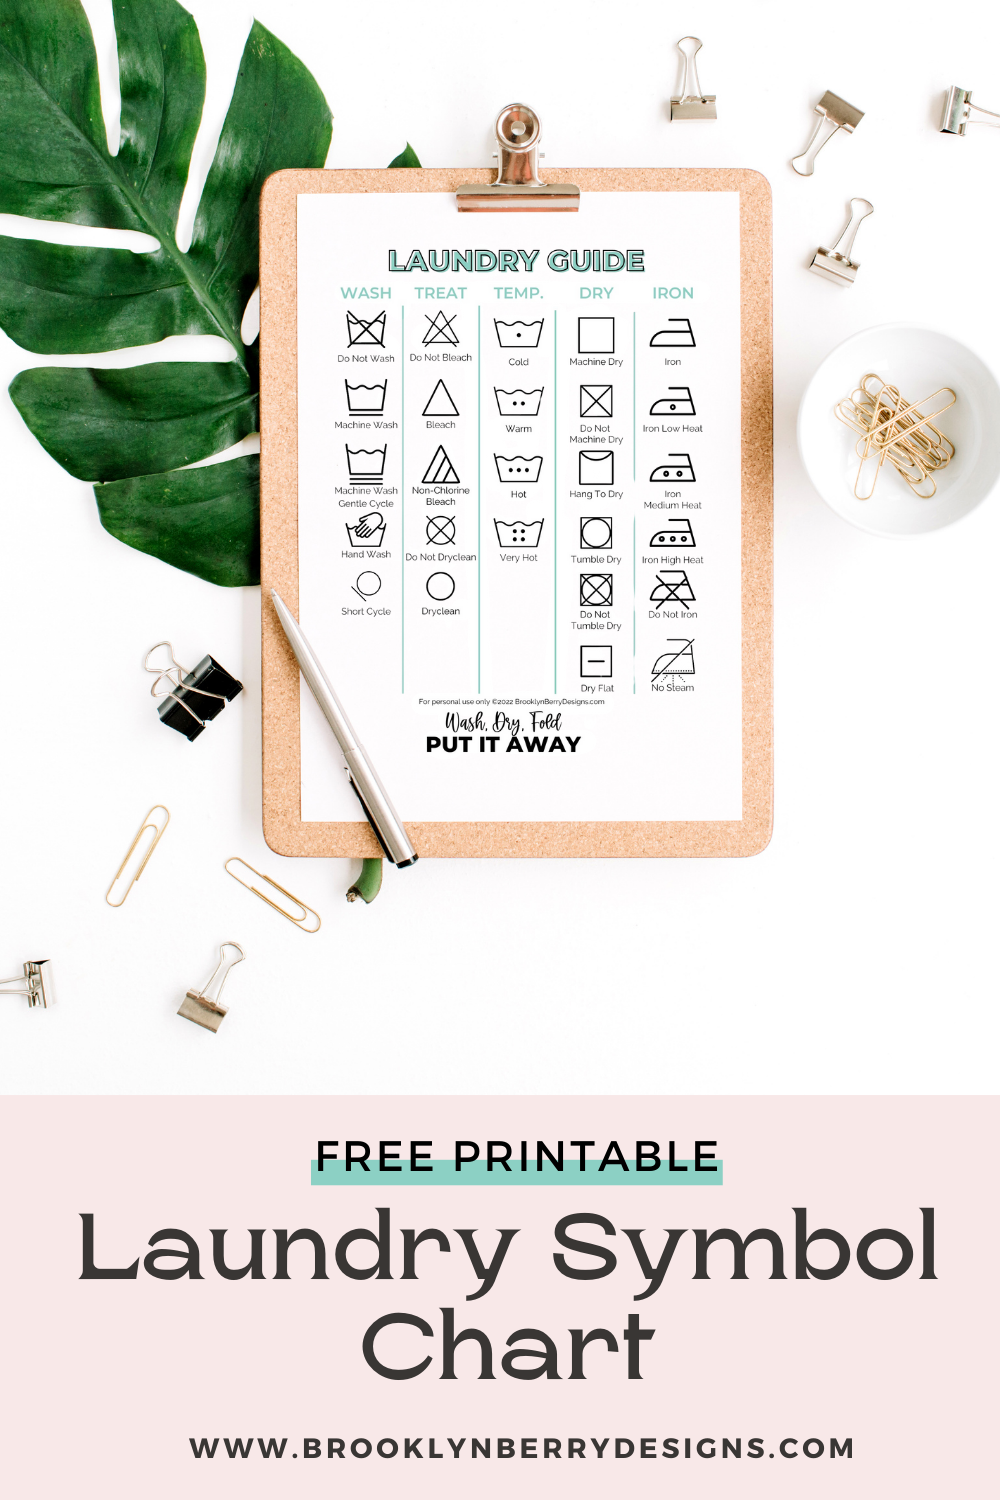 Become a laundry expert by learning what your clothing labels mean. Download this free printable laundry symbols chart and have it handy by your washing machine. via @brookeberry